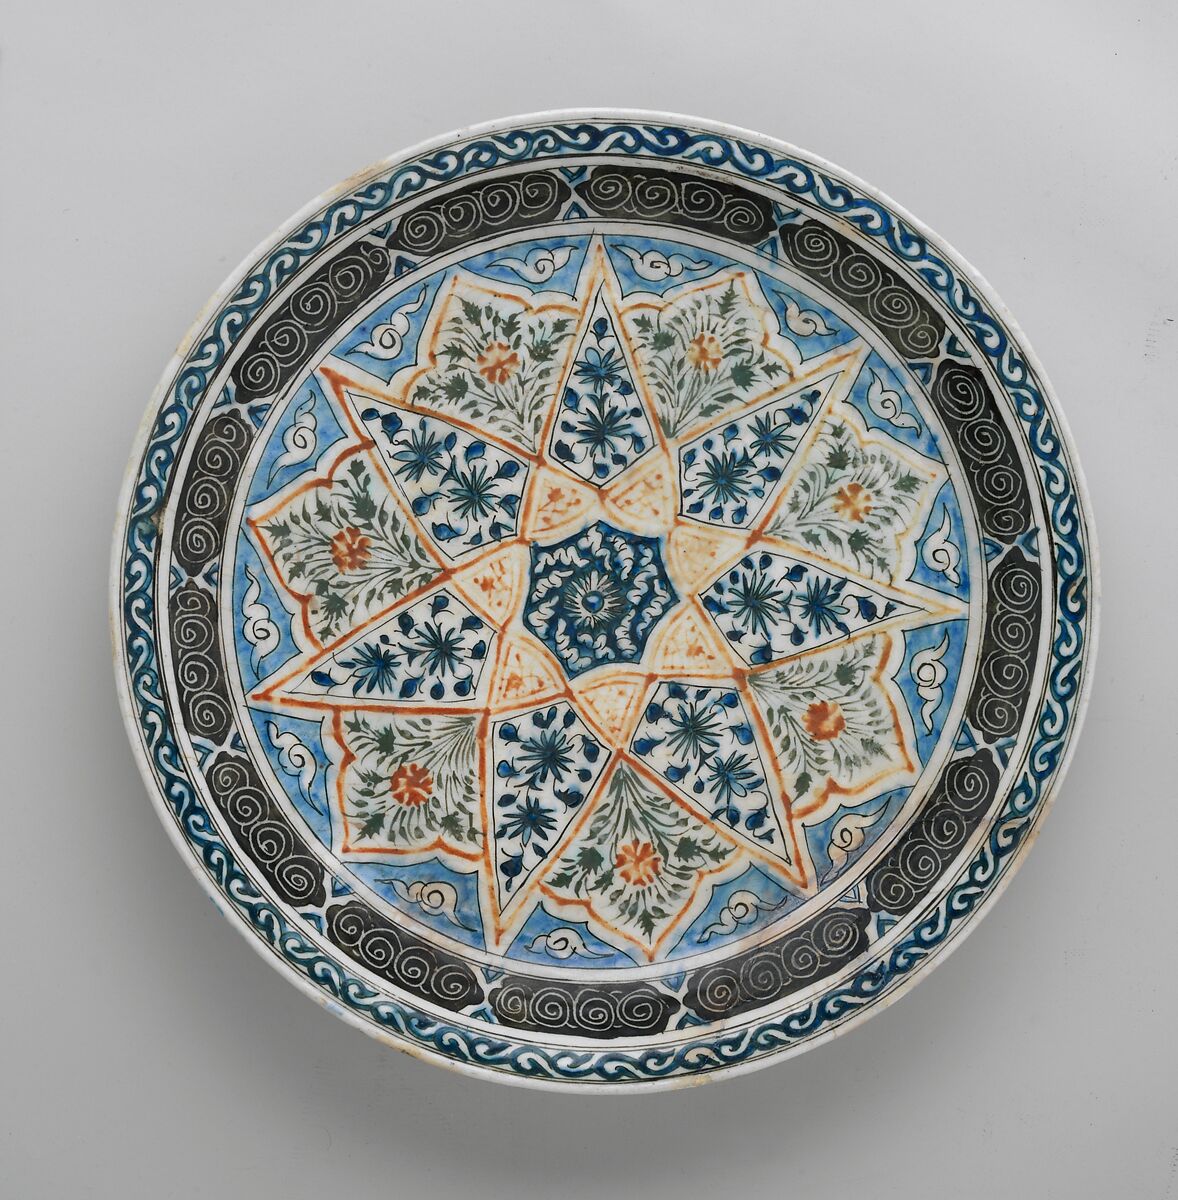 Plate with Vegetal Decoration in a Seven-pointed Star, Stonepaste; polychrome-painted under transparent glaze 